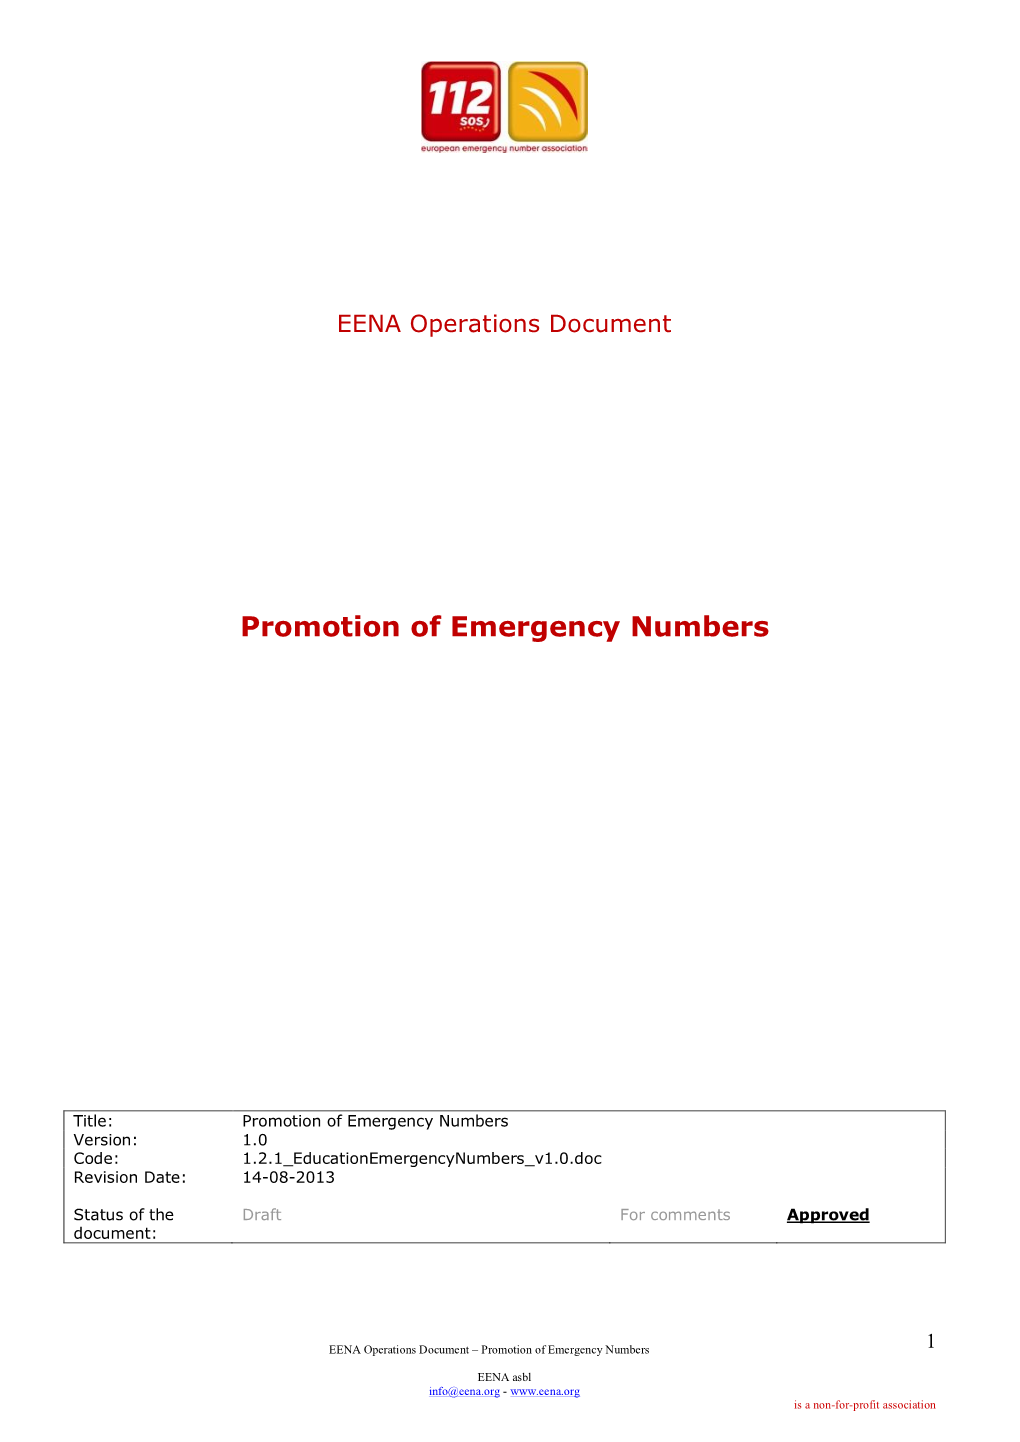 Promotion of Emergency Numbers